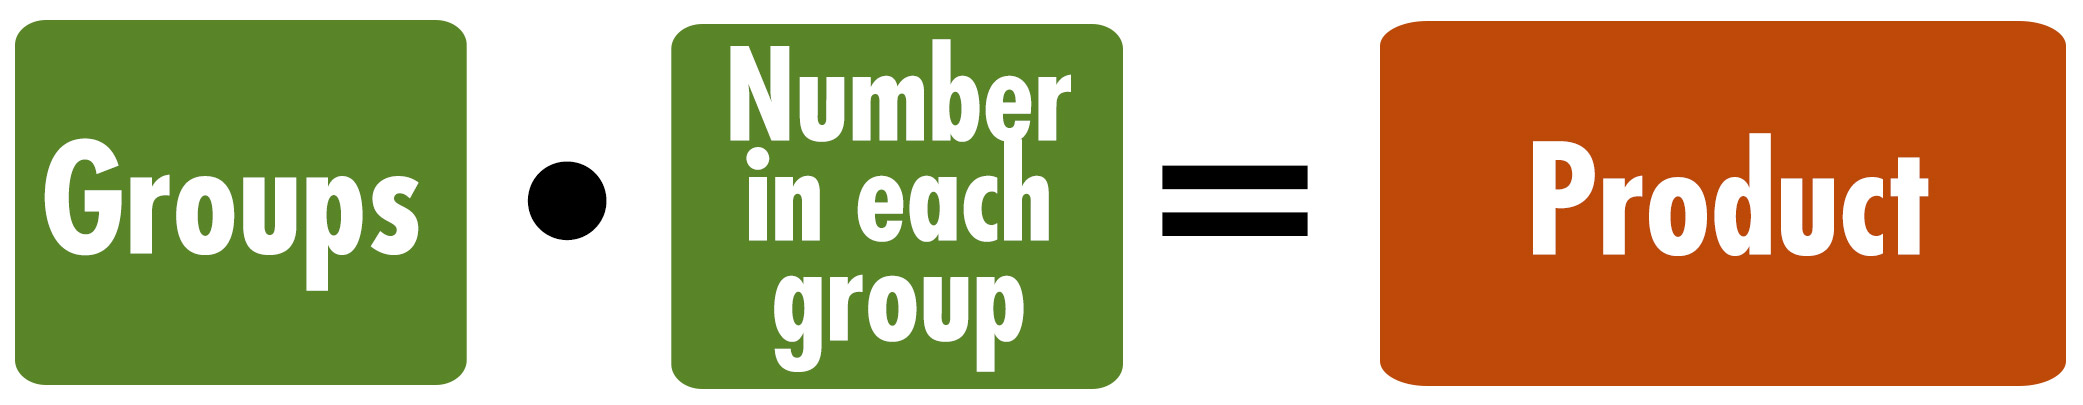 groups times number in each group equals product